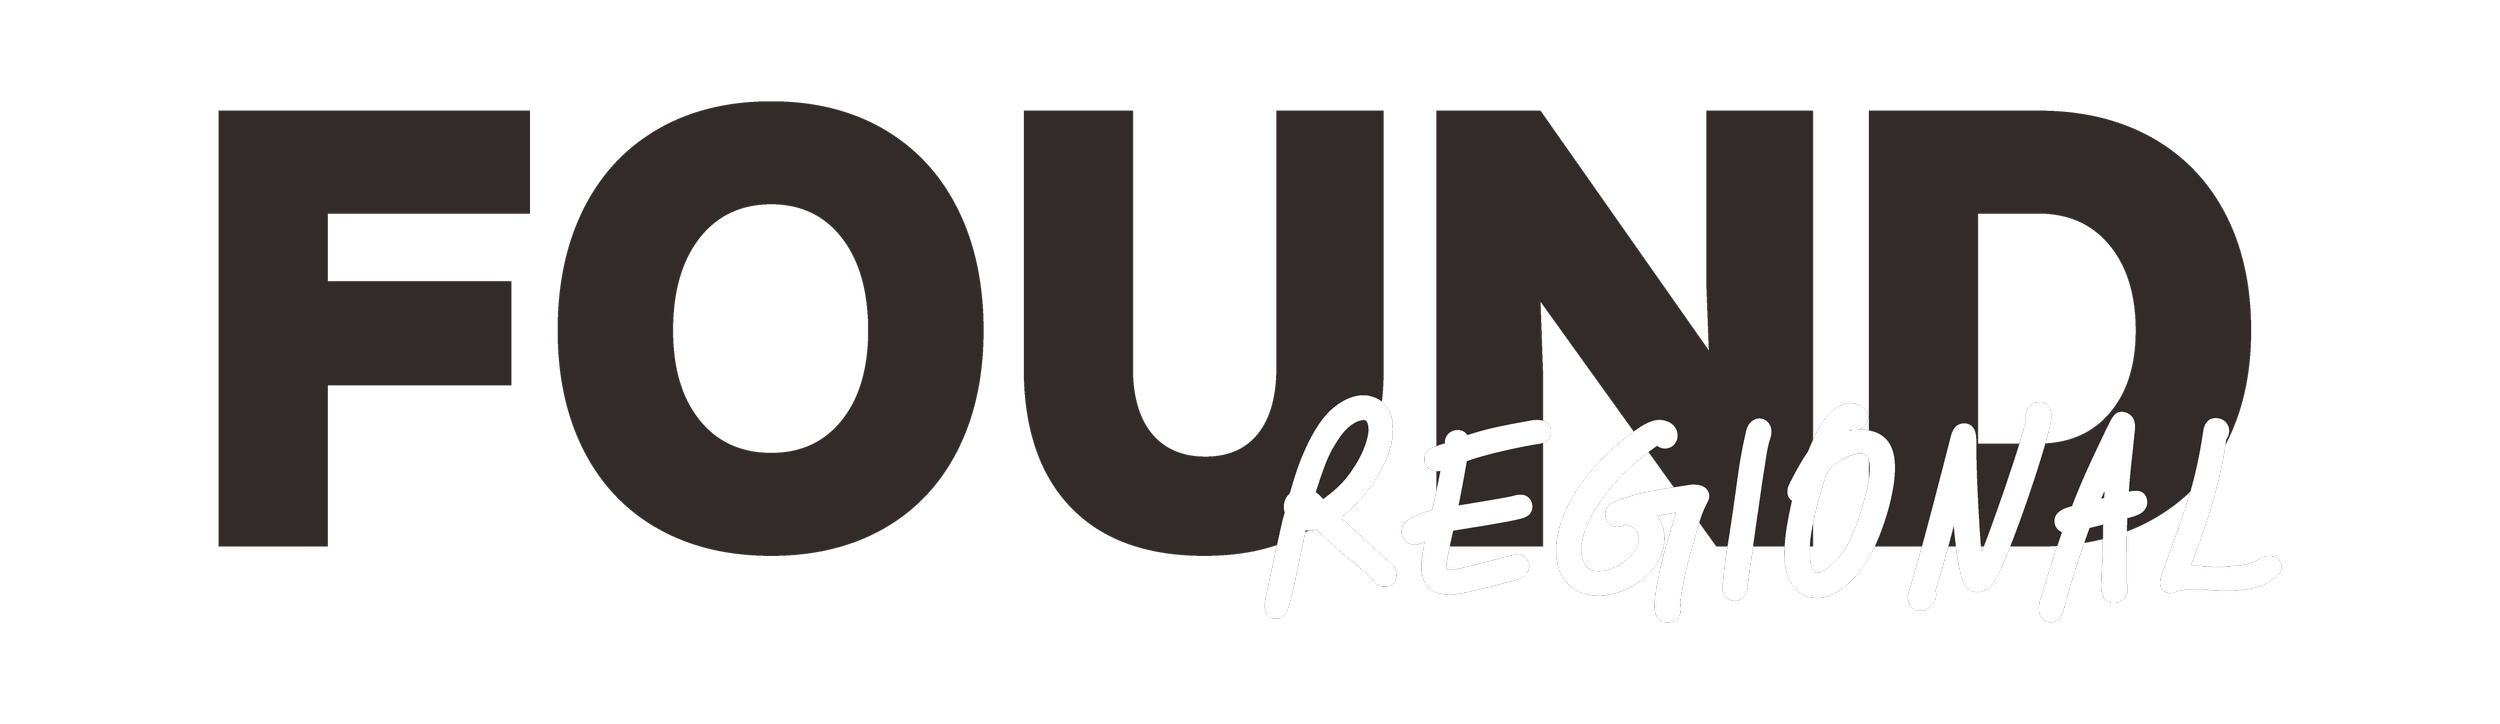 Found+Regional+Logo+Black+and+White.png